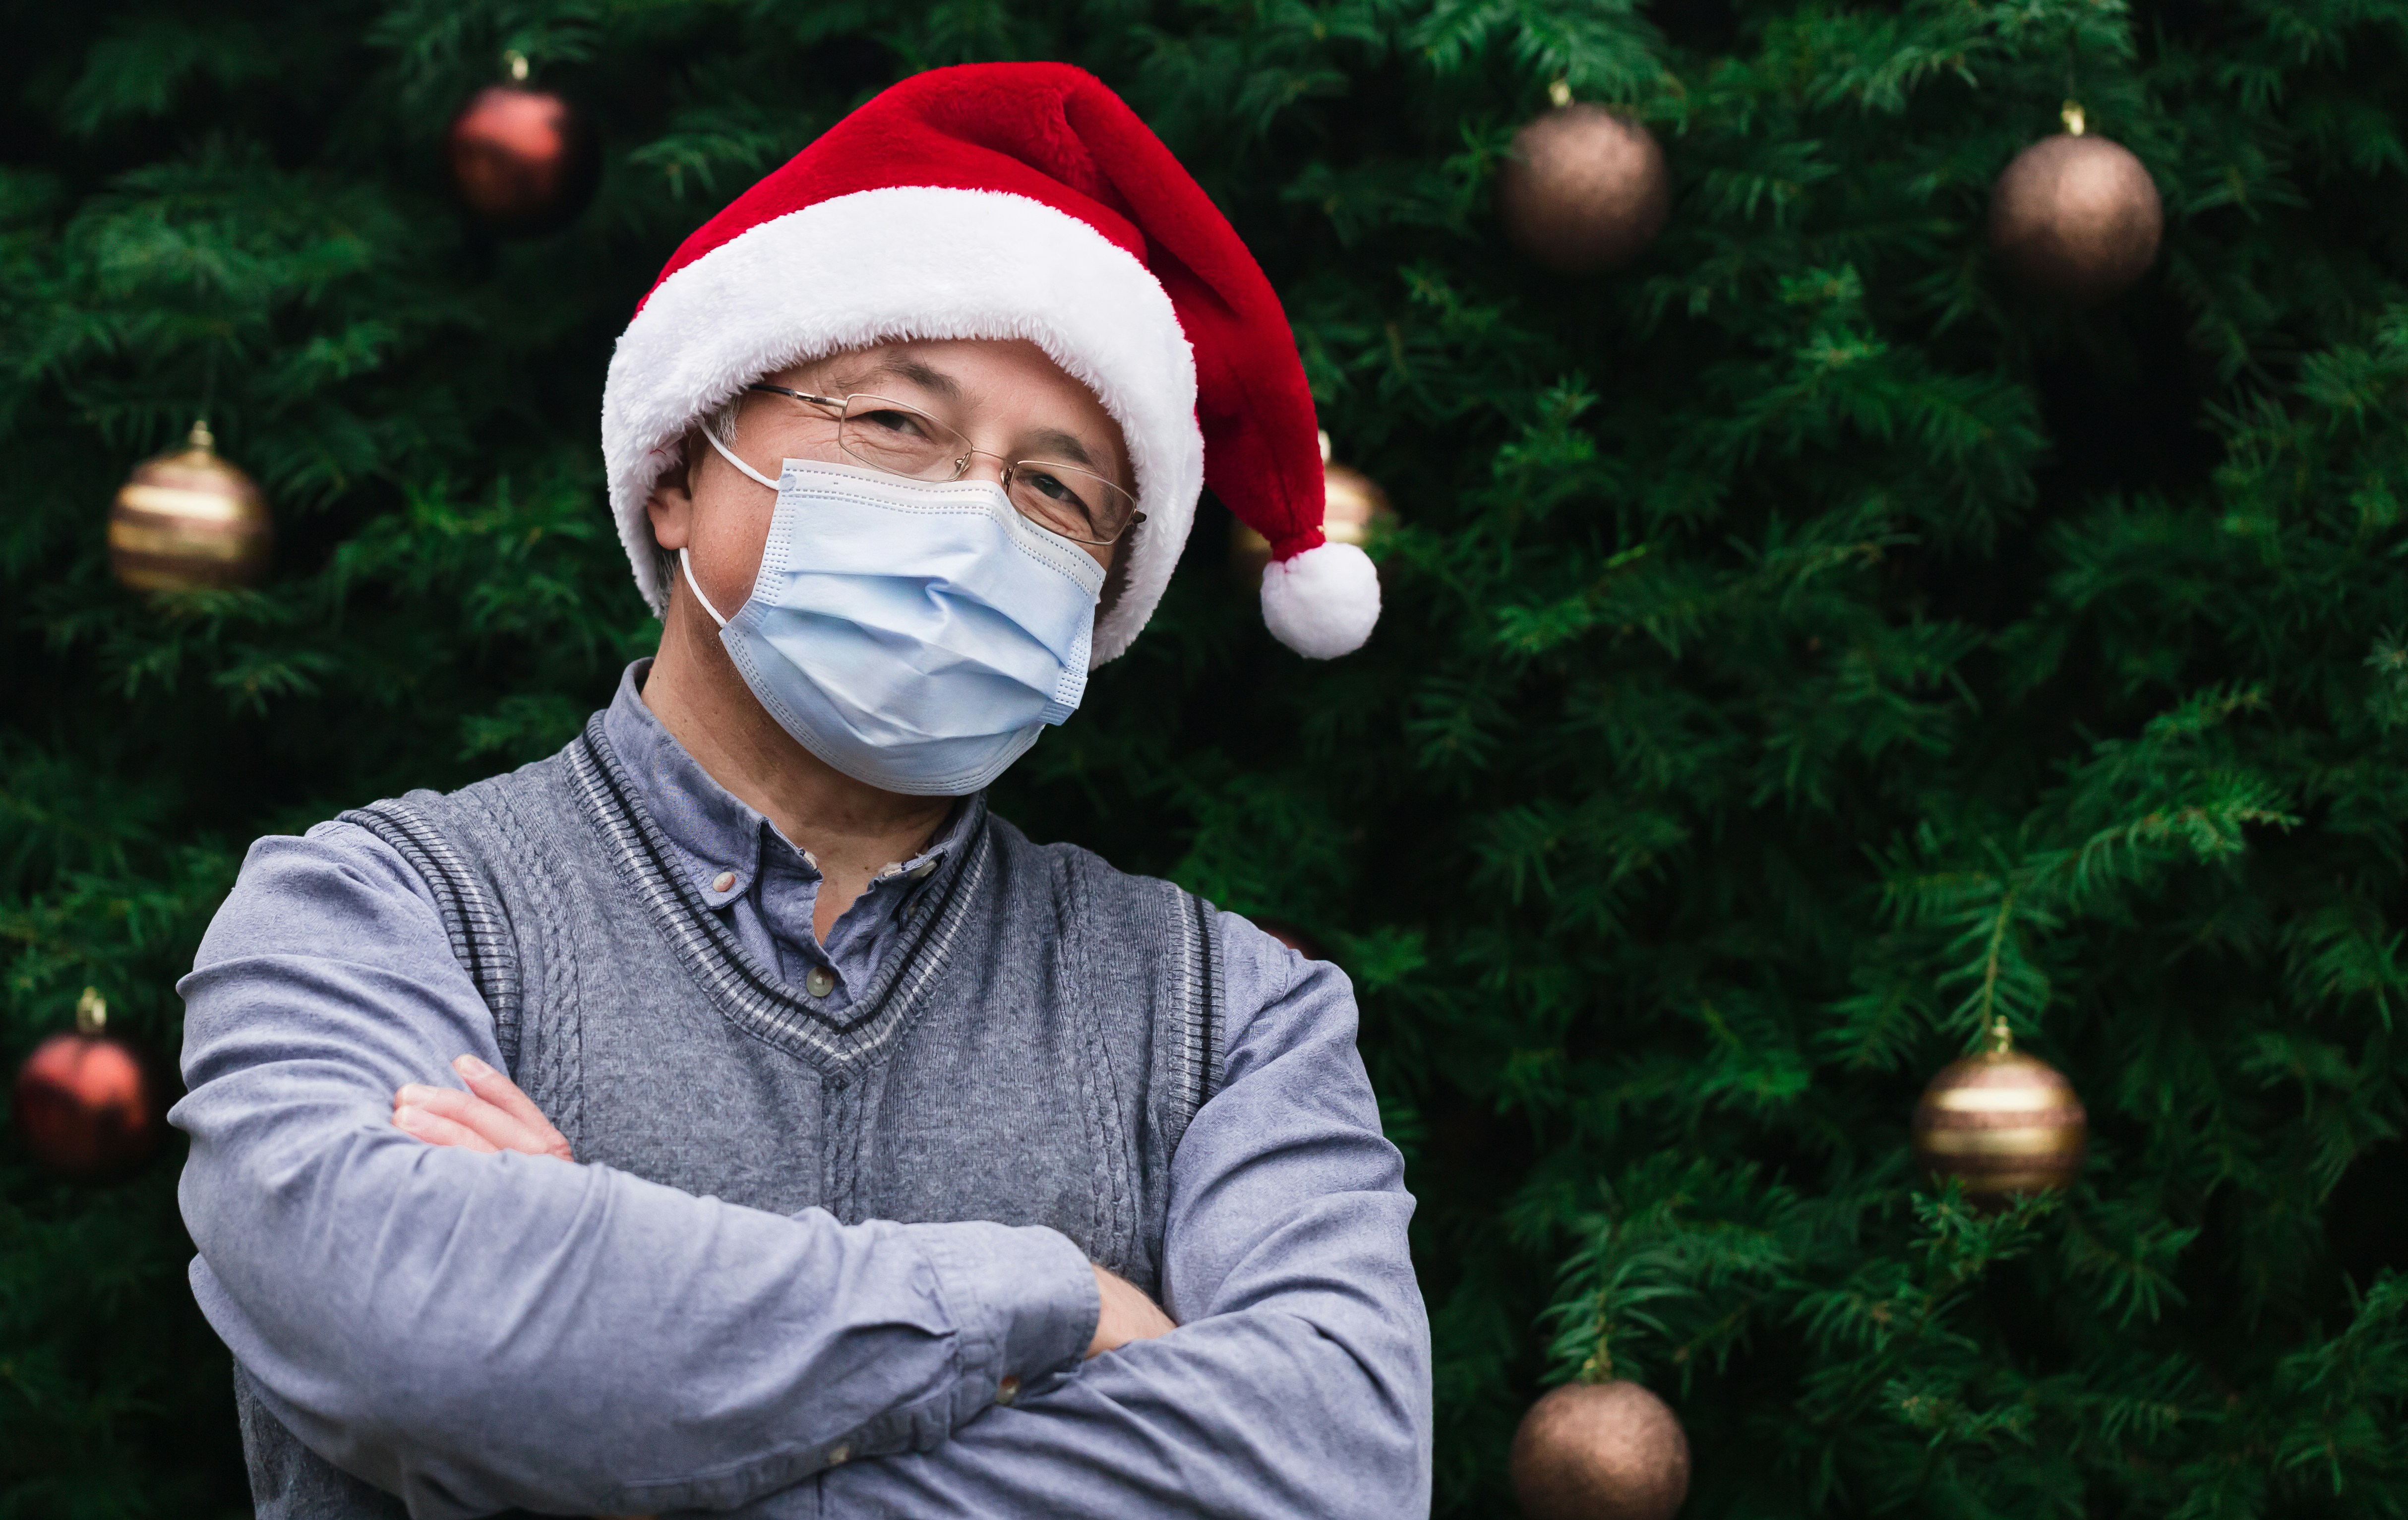 Corona Christmas. Close up Portrait of senior man wearing a santa claus hat and medical mask with emotion. Against the background of a Christmas tree. Coronavirus pandemic